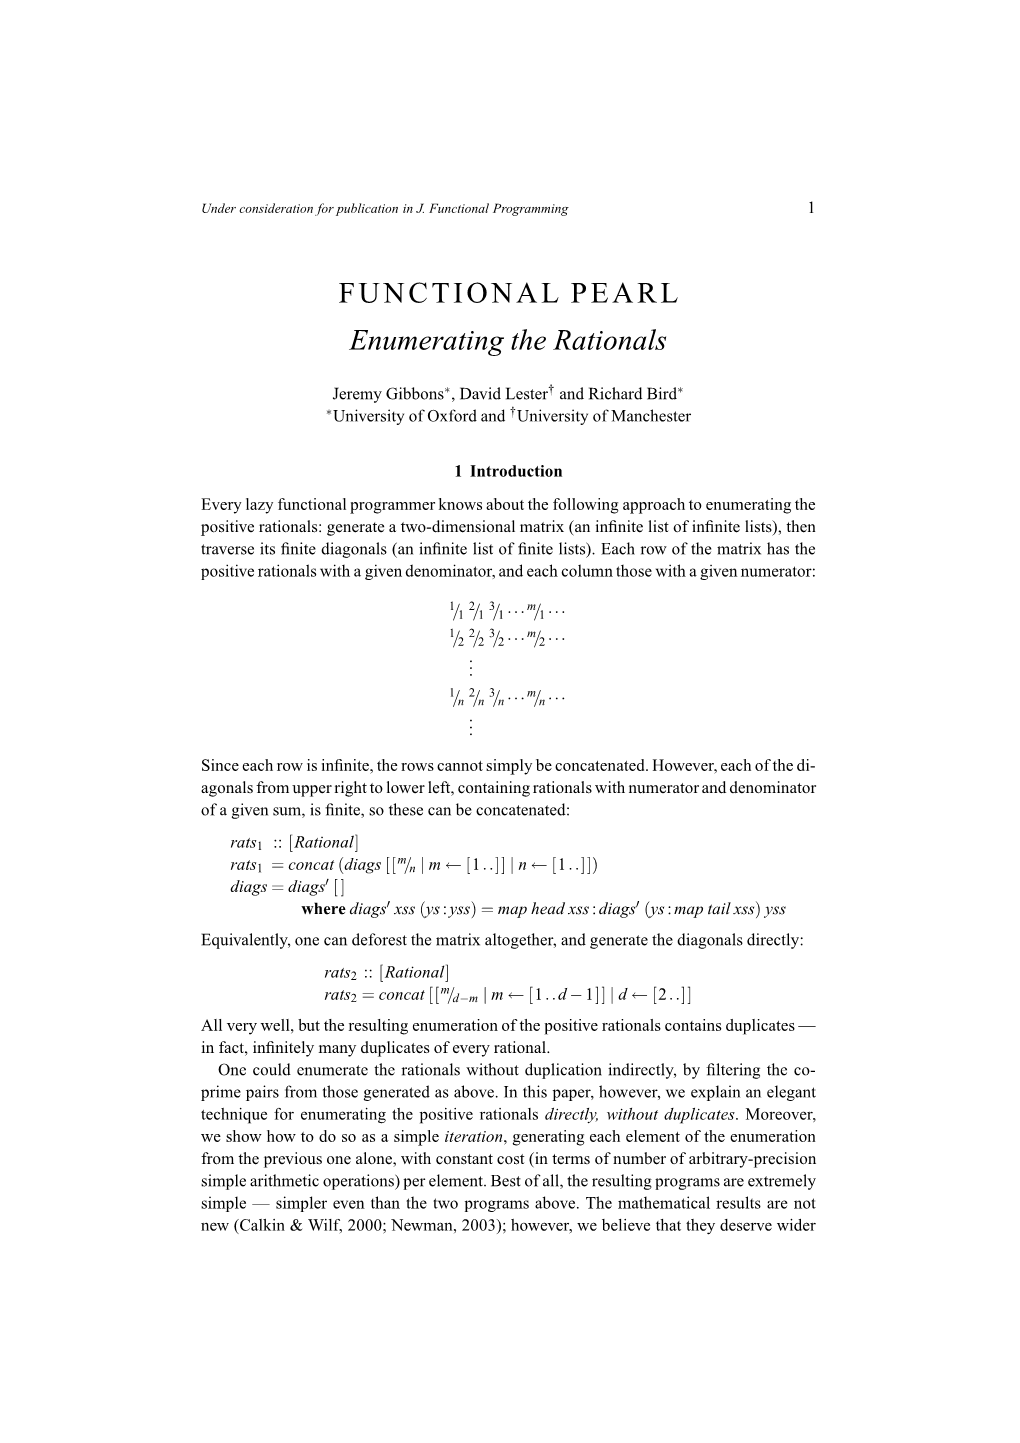 FUNCTIONAL PEARL Enumerating the Rationals